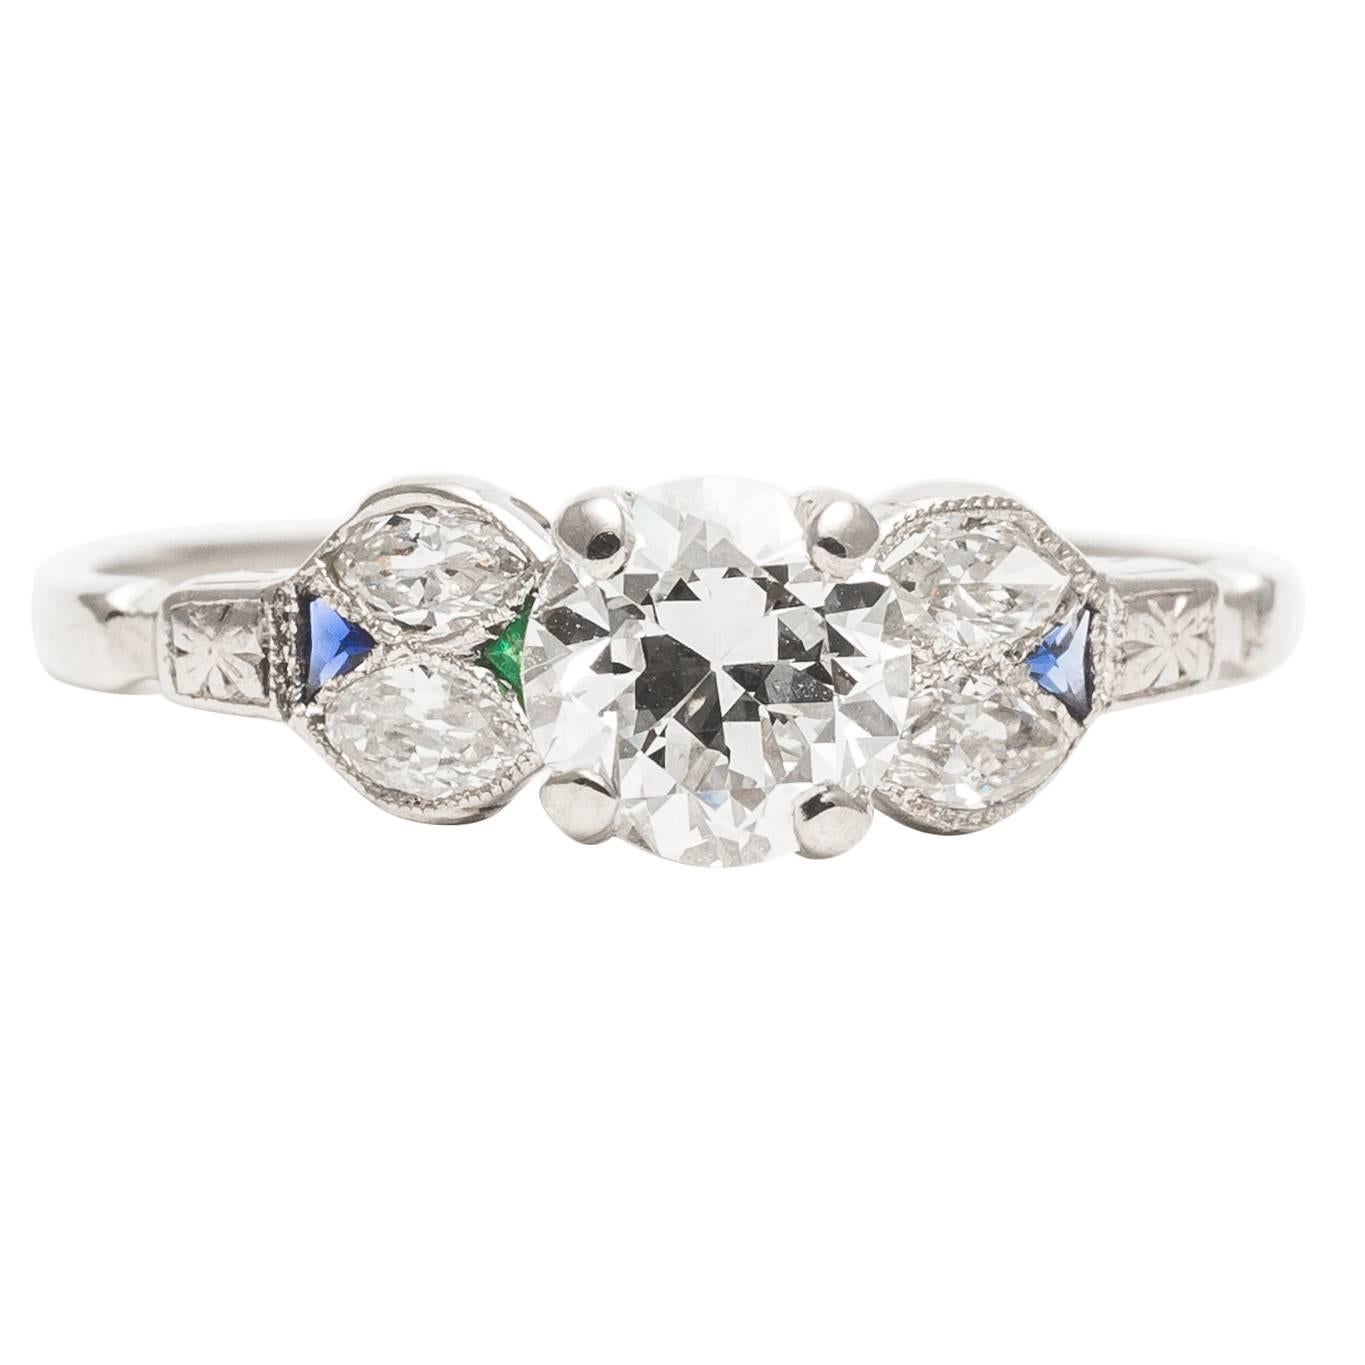 Art Deco 0.80 Carat Diamond, Emerald and Sapphire Engagement Ring For Sale